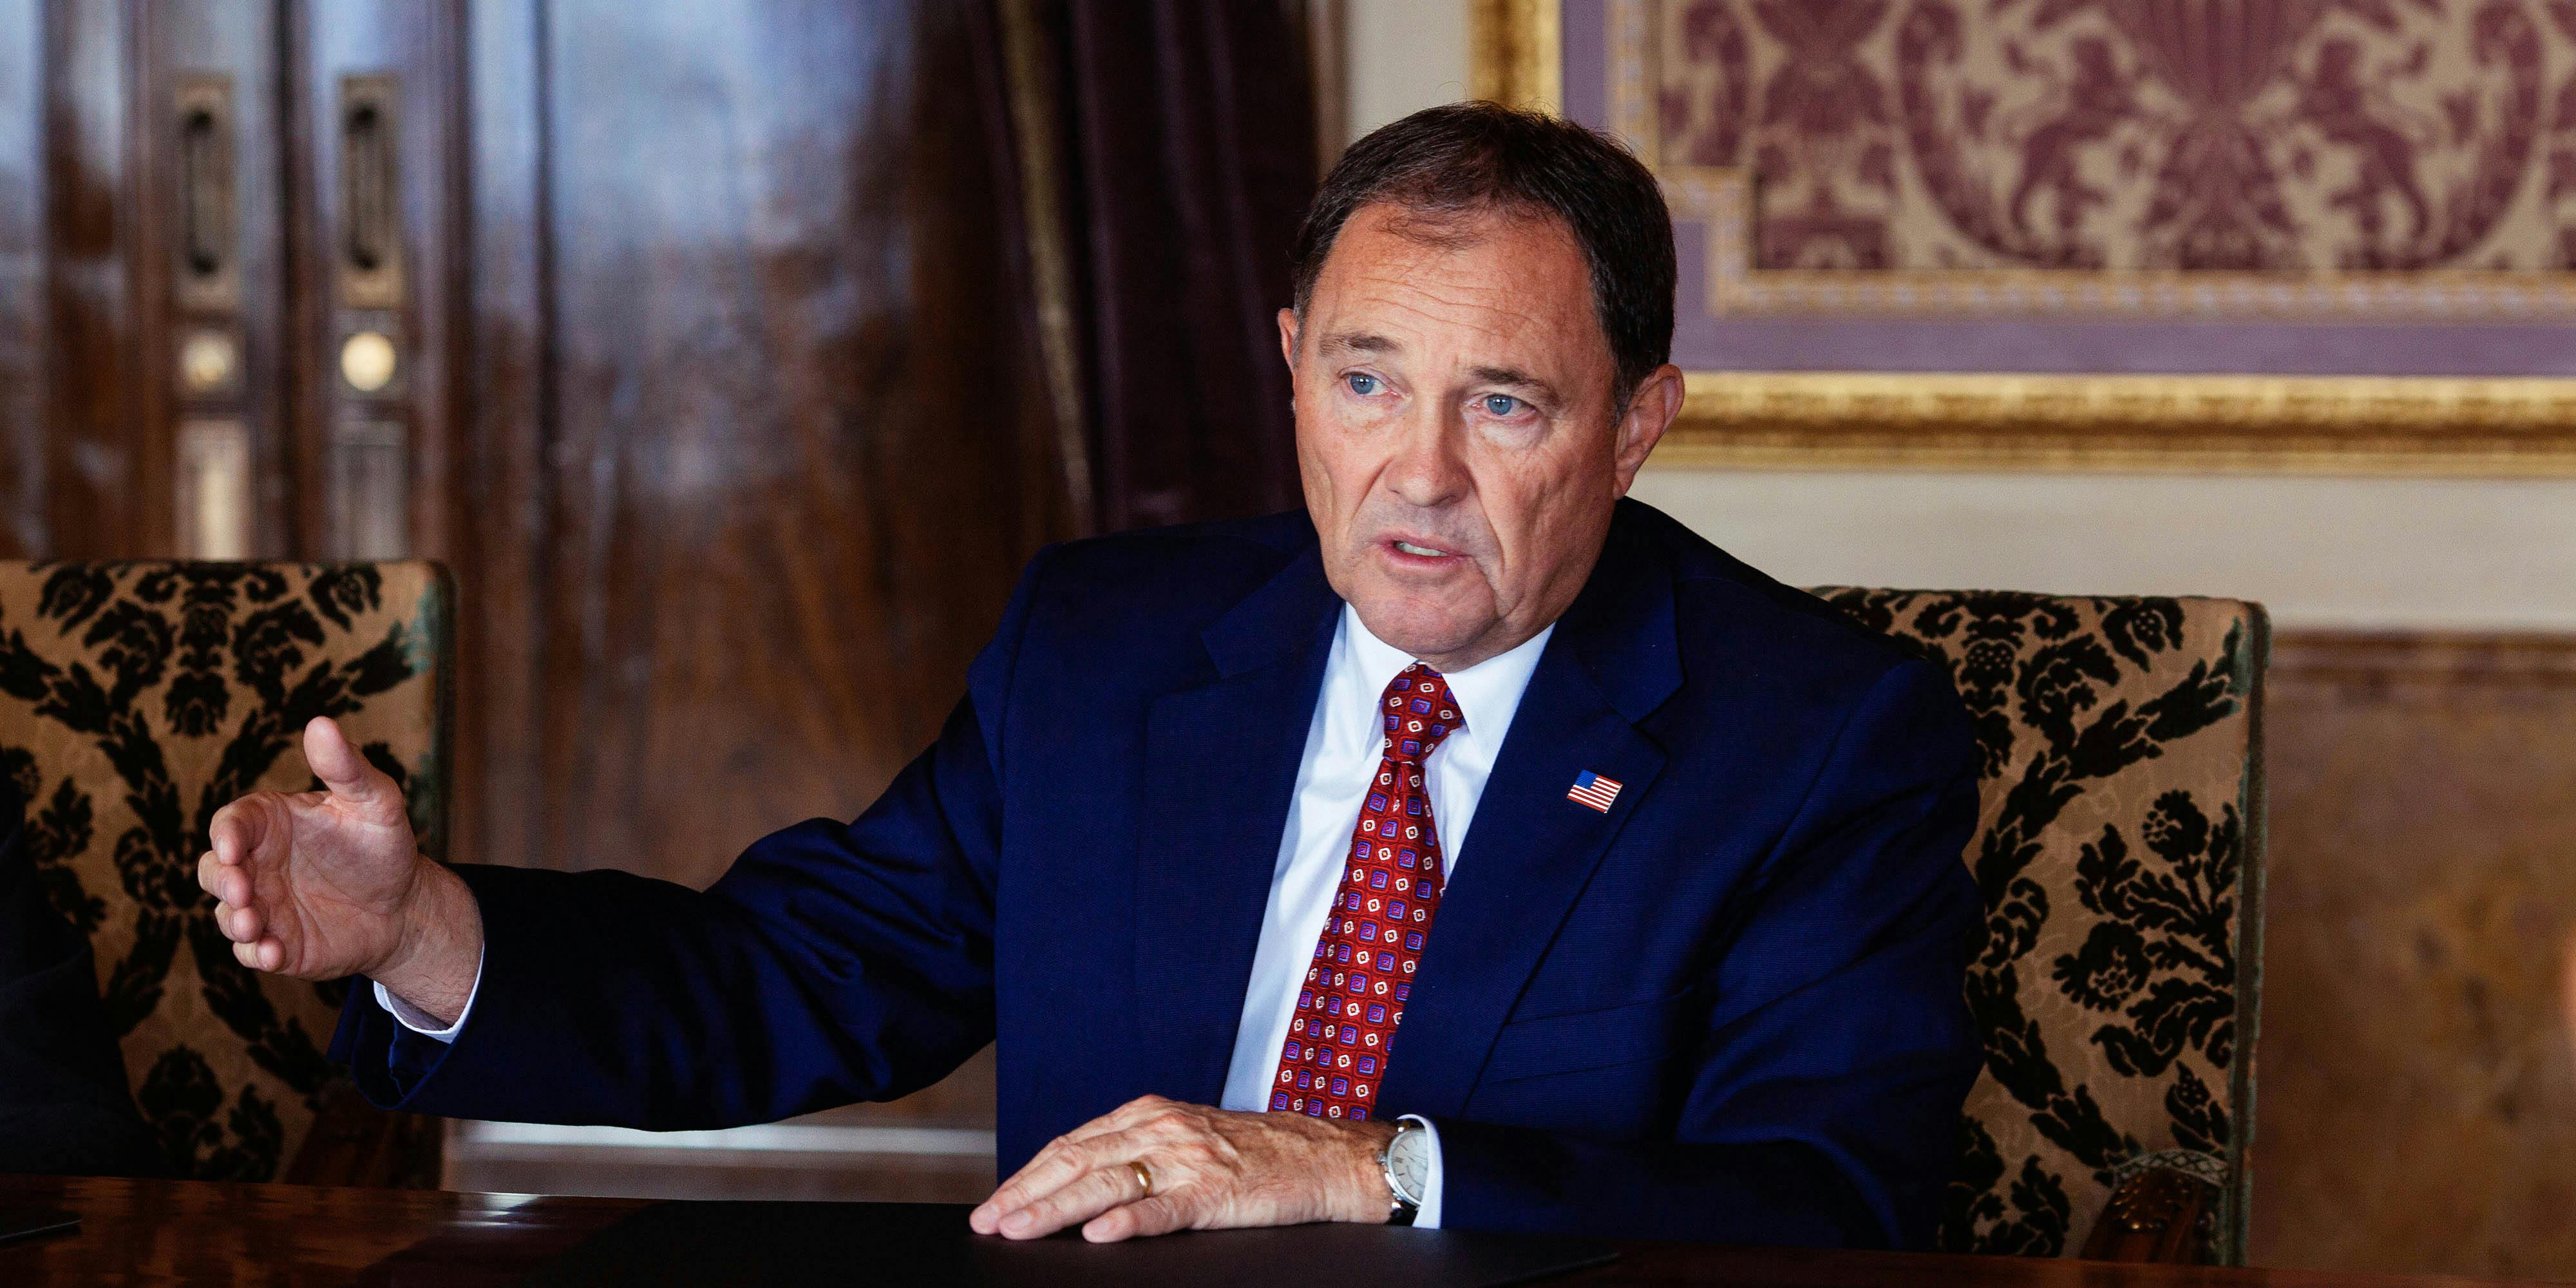 Gary Herbert, governor of Utah, speaks during an interview in the Gold Room of the State Capitol building in Salt Lake City, Utah, U.S., on Tuesday, Oct. 27, 2015. (Photo by Cayve Clifford/Bloomberg via Getty Images)